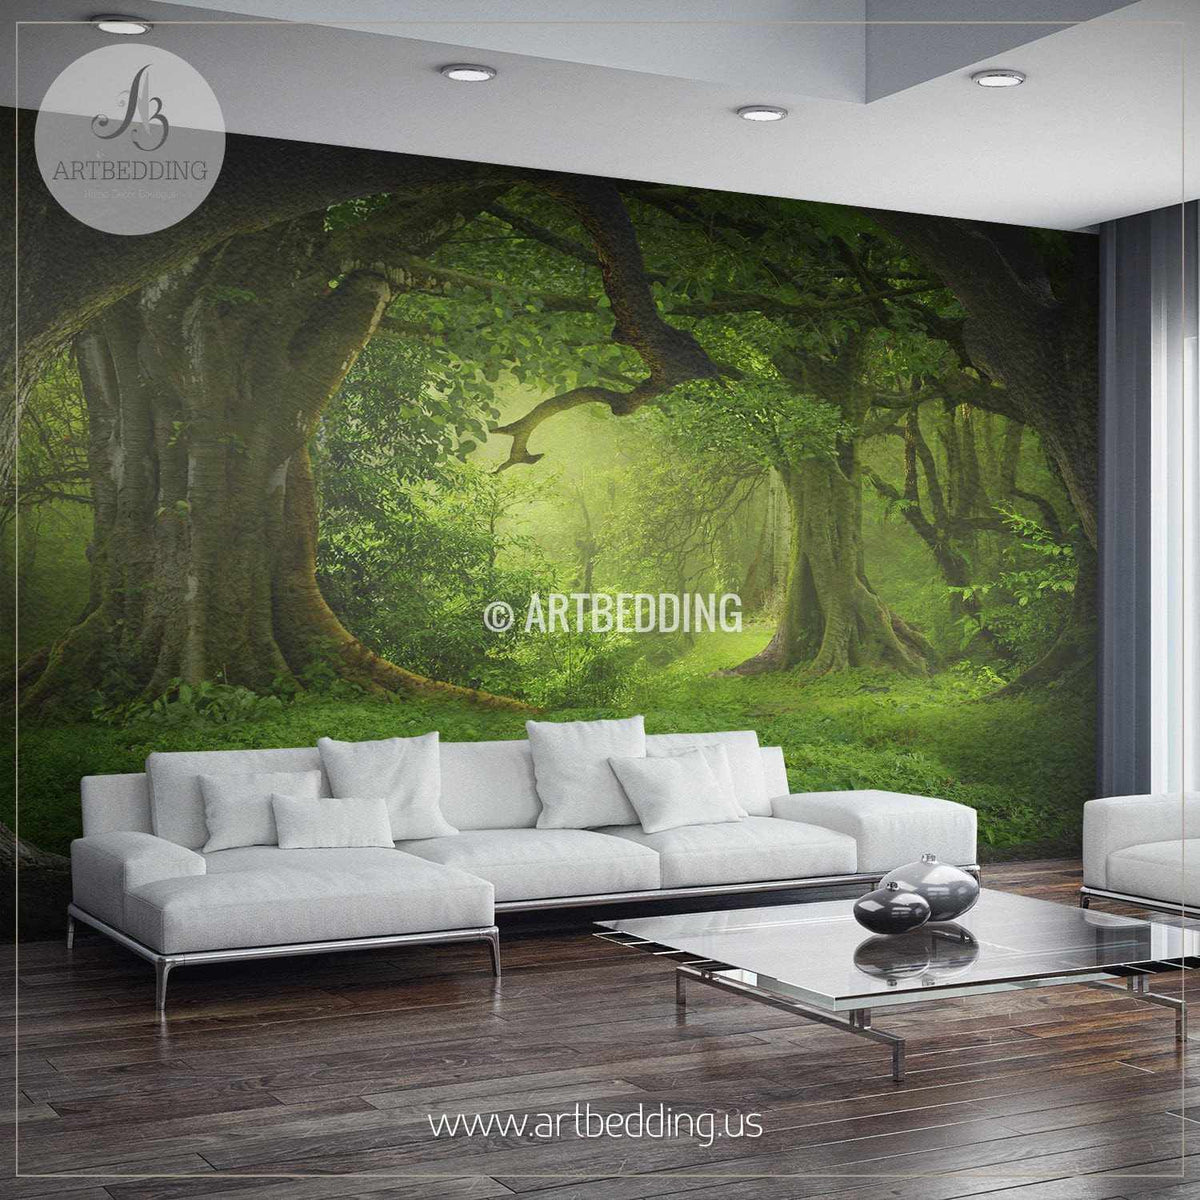 Wall Adhesive for Interior Decoration